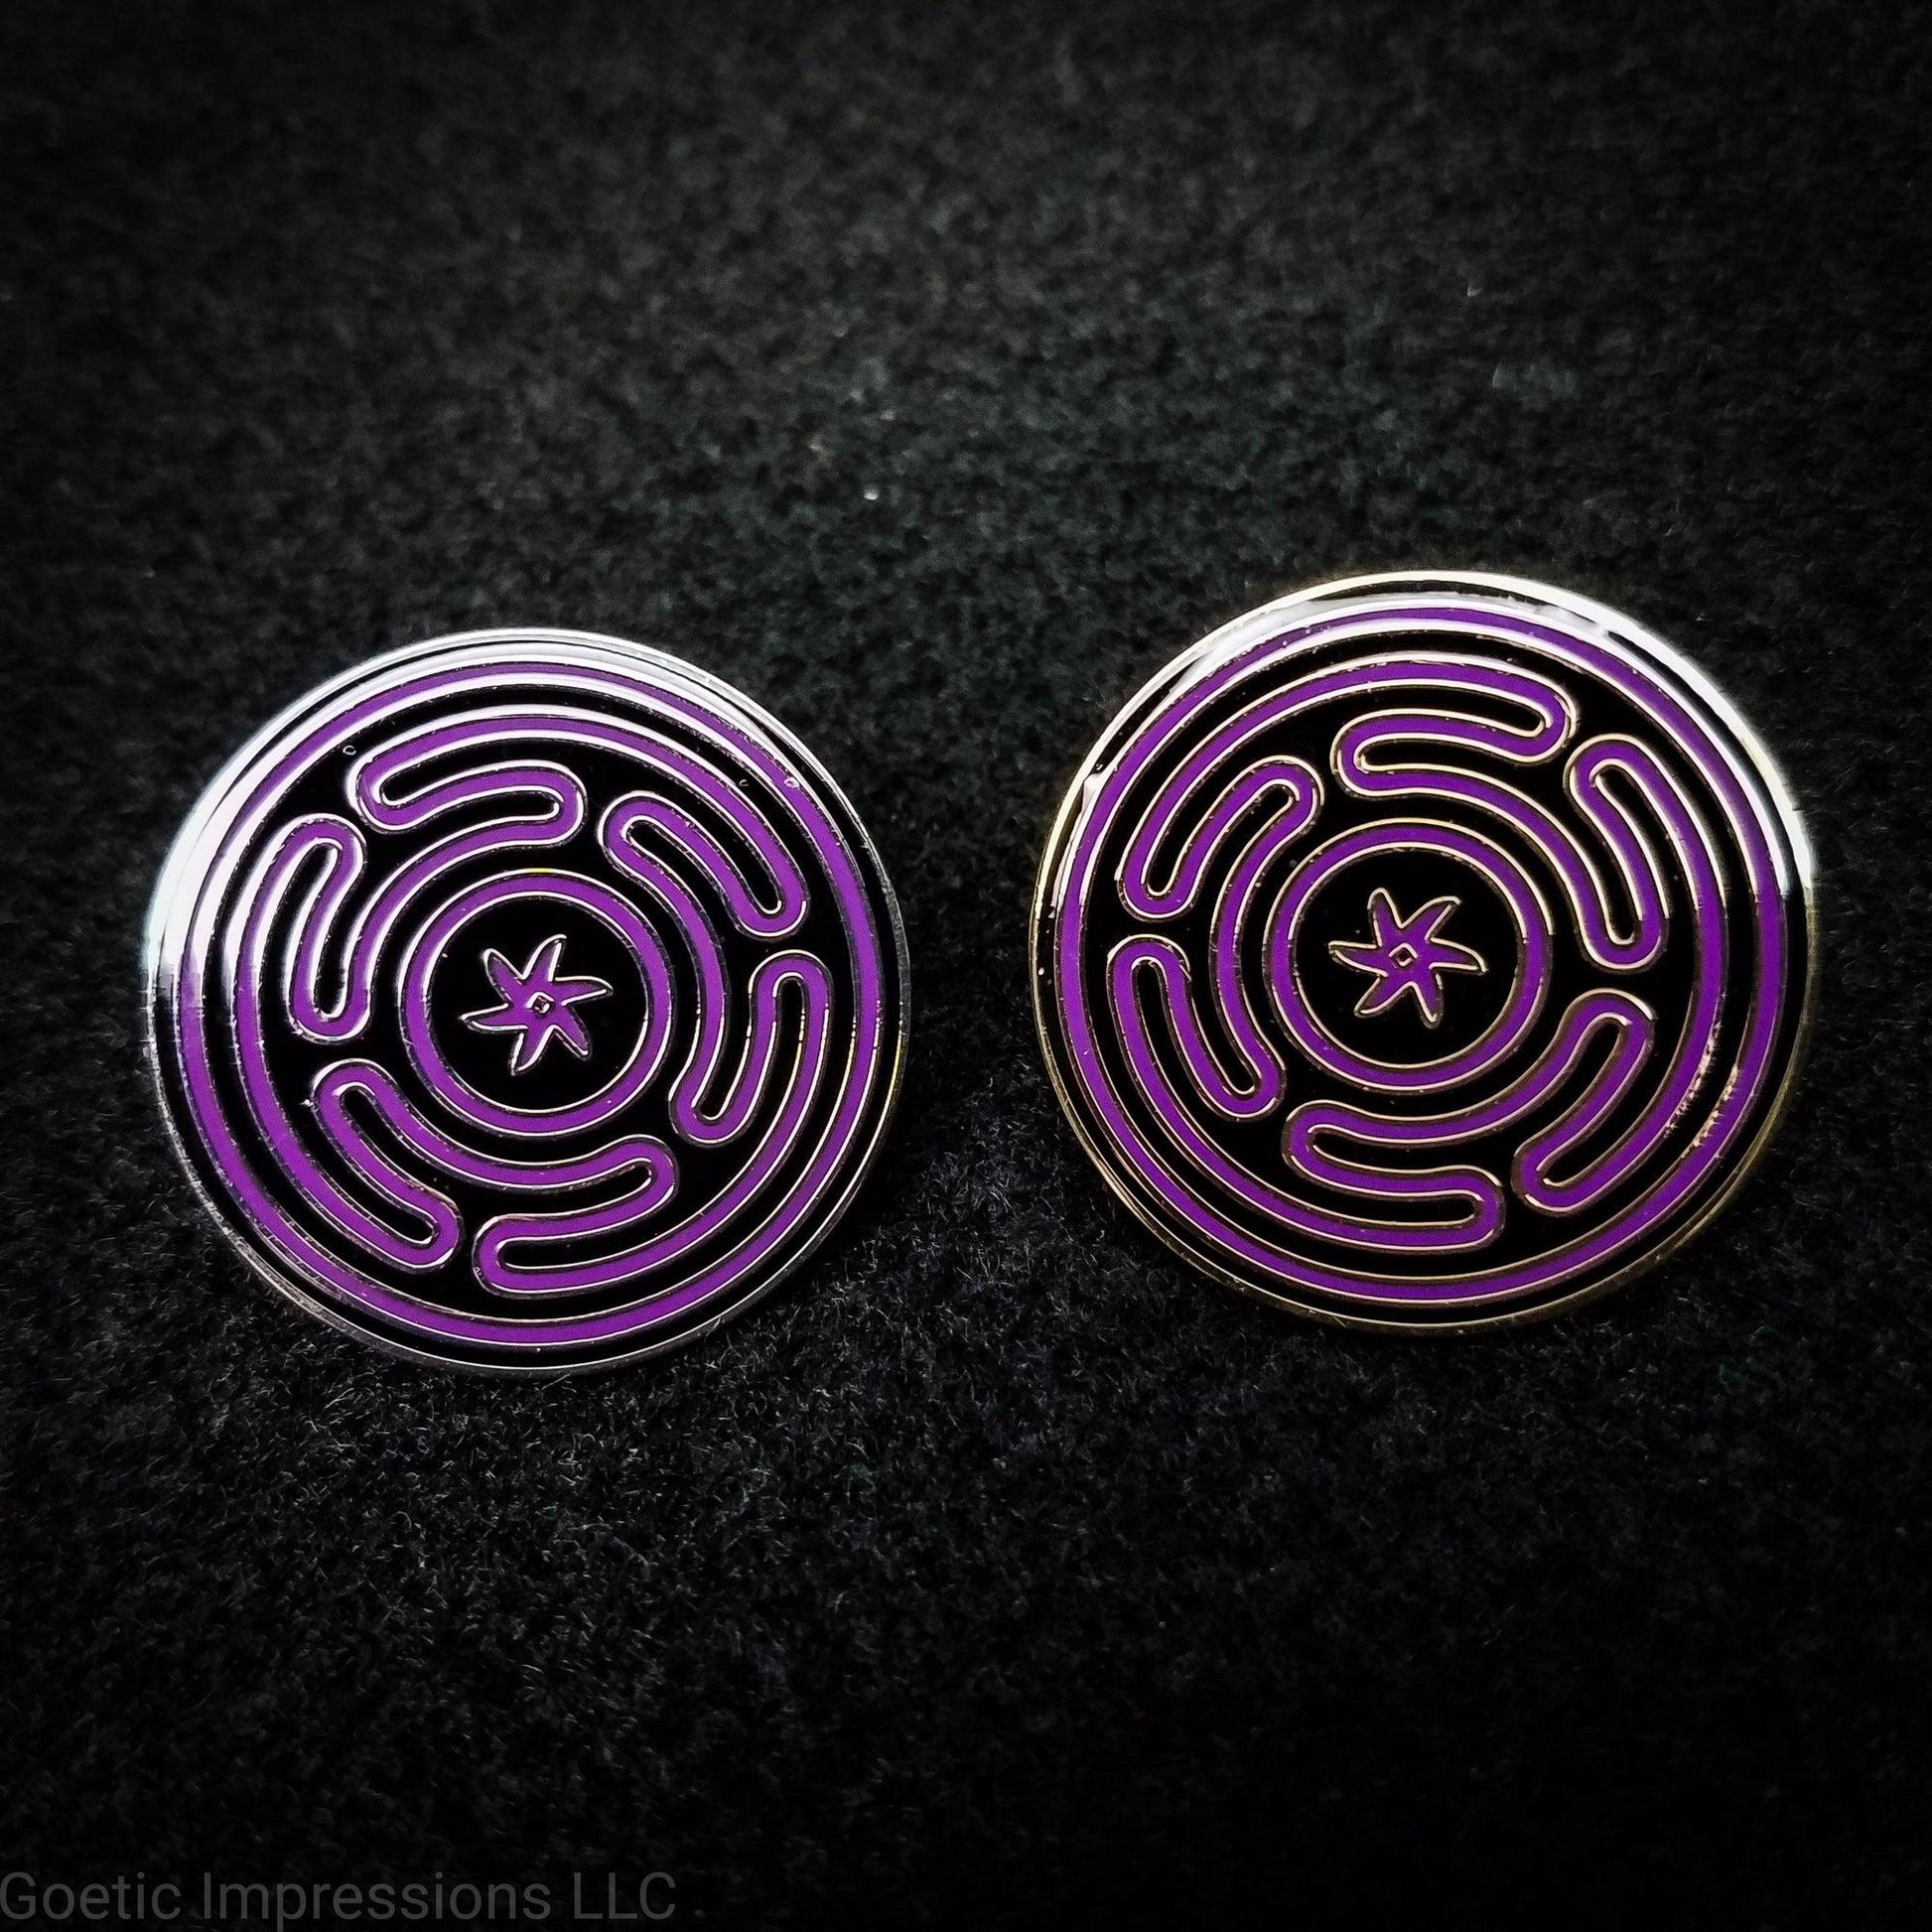 Two hard enamel pins featuring the Strophlos or Wheel of Hecate sigil. The sigil itself is colored in purple on a black background. The pins come in silver or gold plating.